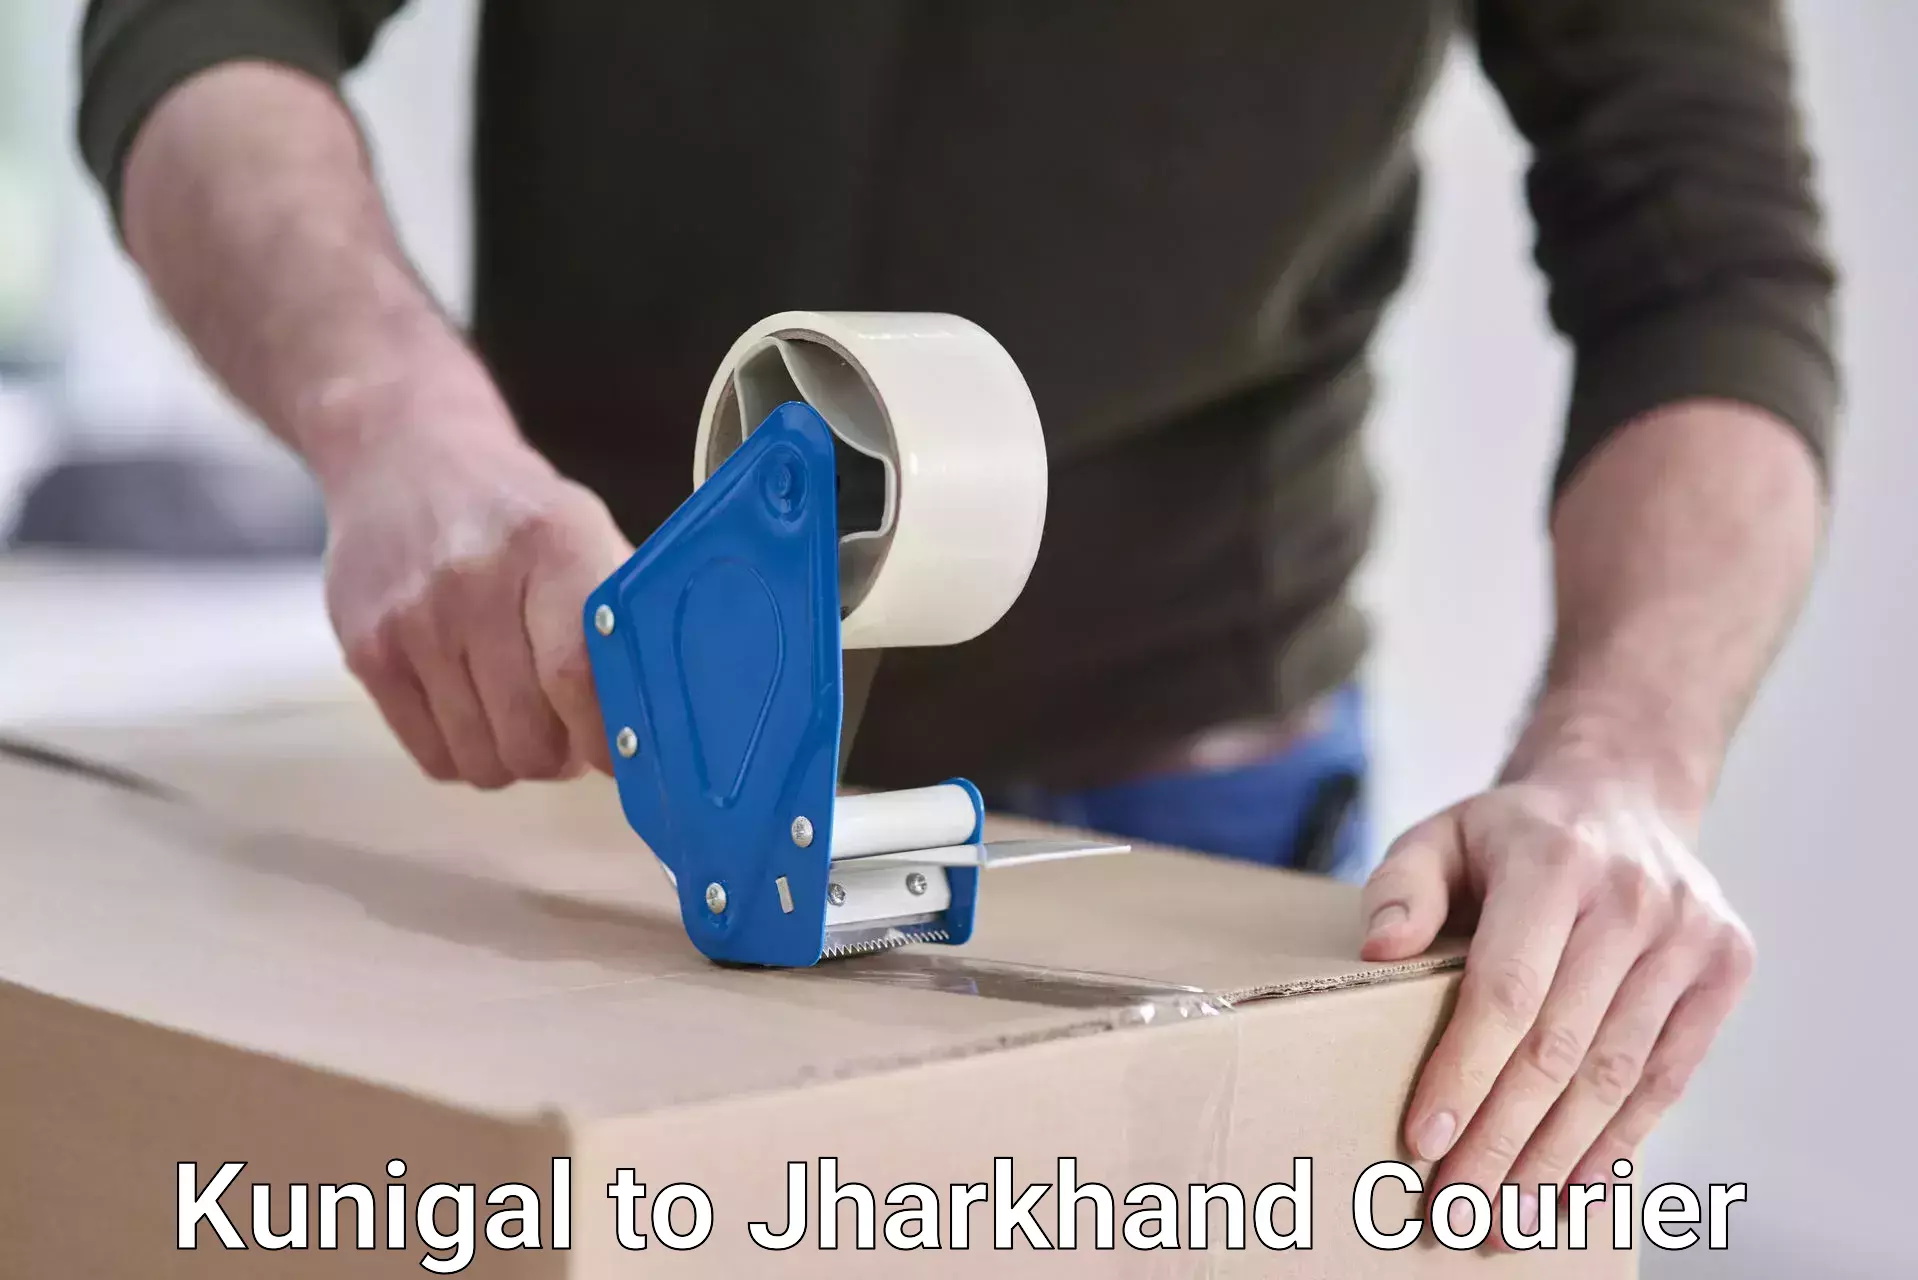 Customer-centric shipping in Kunigal to Jharkhand